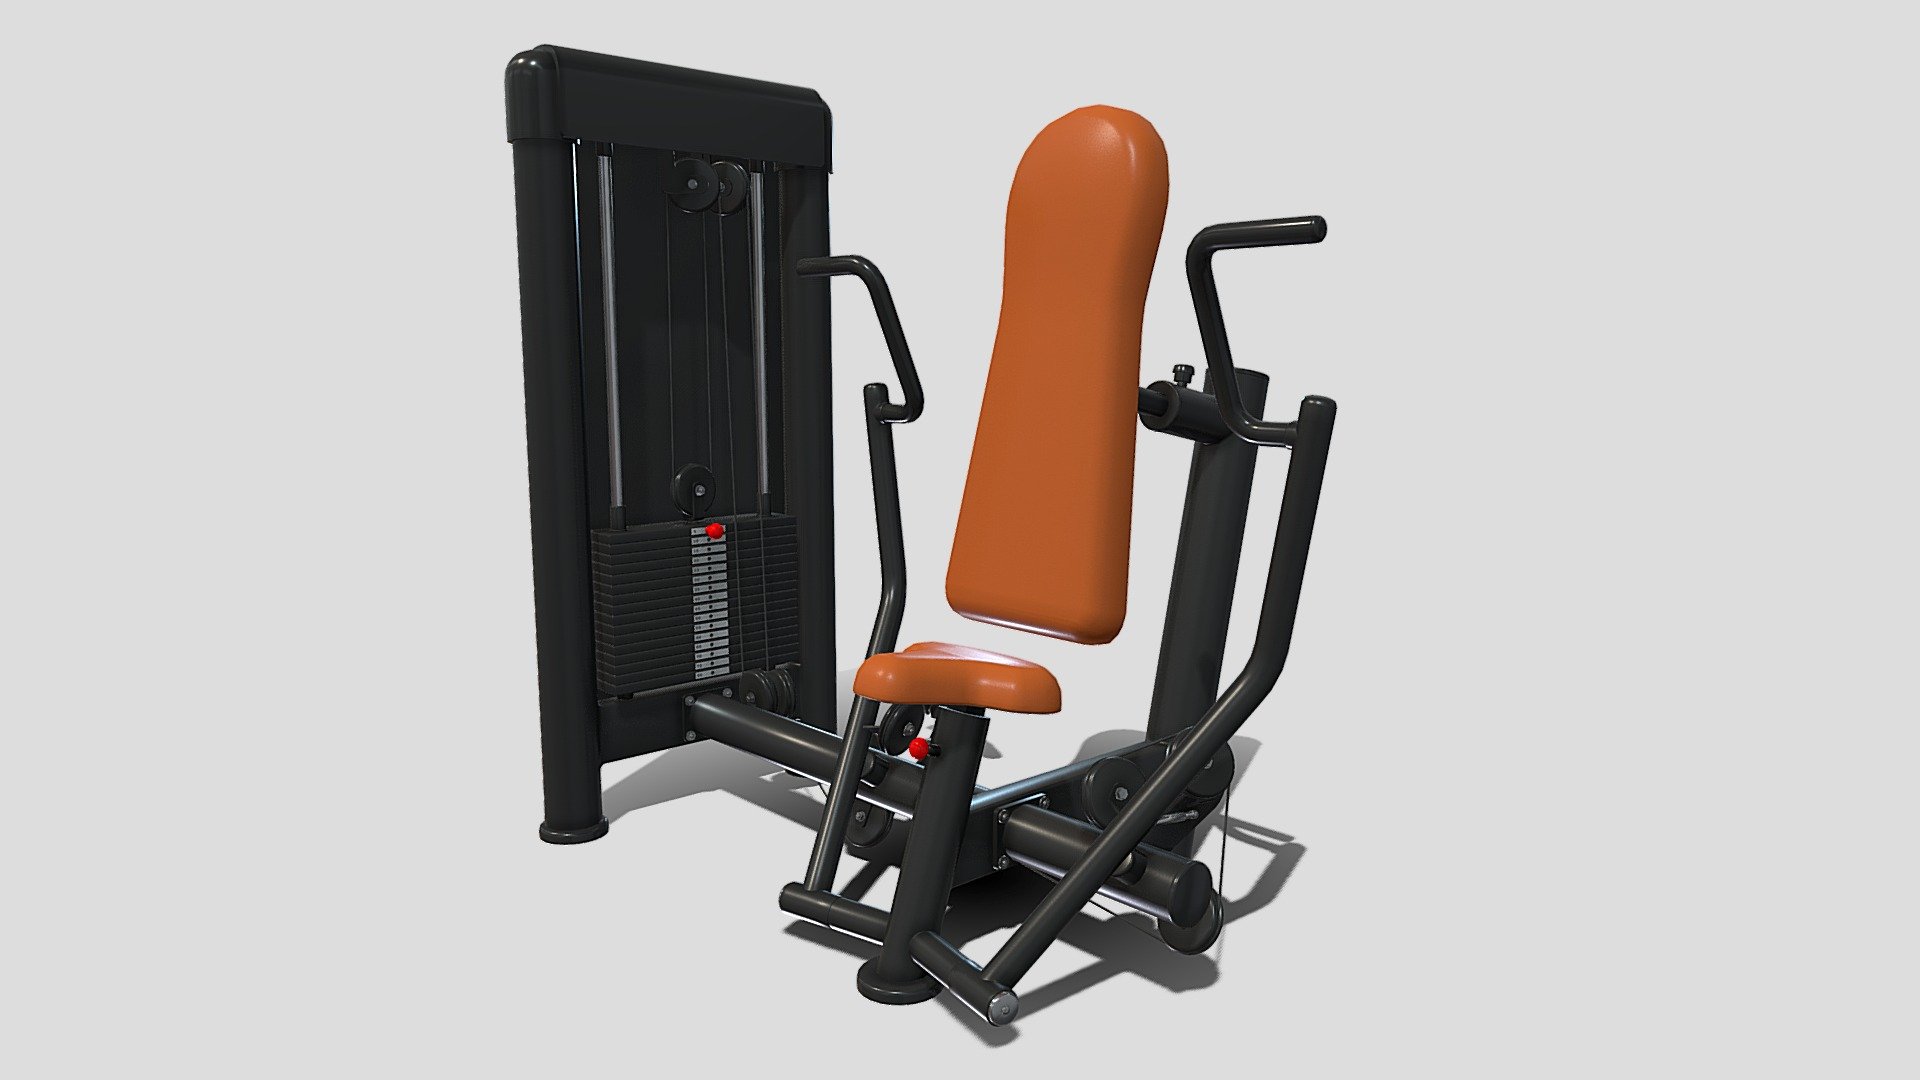 Gym machine 3d model built to real size, rendered with Cycles in Blender, as per seen on attached images. 

File formats:
-.blend, rendered with cycles, as seen in the images;
-.obj, with materials applied;
-.dae, with materials applied;
-.fbx, with materials applied;
-.stl;

Files come named appropriately and split by file format.

3D Software:
The 3D model was originally created in Blender 3.1 and rendered with Cycles.

Materials and textures:
The models have materials applied in all formats, and are ready to import and render.
Materials are image based using PBR, the model comes with five 4k png image textures.

Preview scenes:
The preview images are rendered in Blender using its built-in render engine &lsquo;Cycles'.
Note that the blend files come directly with the rendering scene included and the render command will generate the exact result as seen in previews.

General:
The models are built mostly out of quads.

For any problems please feel free to contact me.

Don't forget to rate and enjoy! - Vertical chest machine - Buy Royalty Free 3D model by dragosburian 3d model